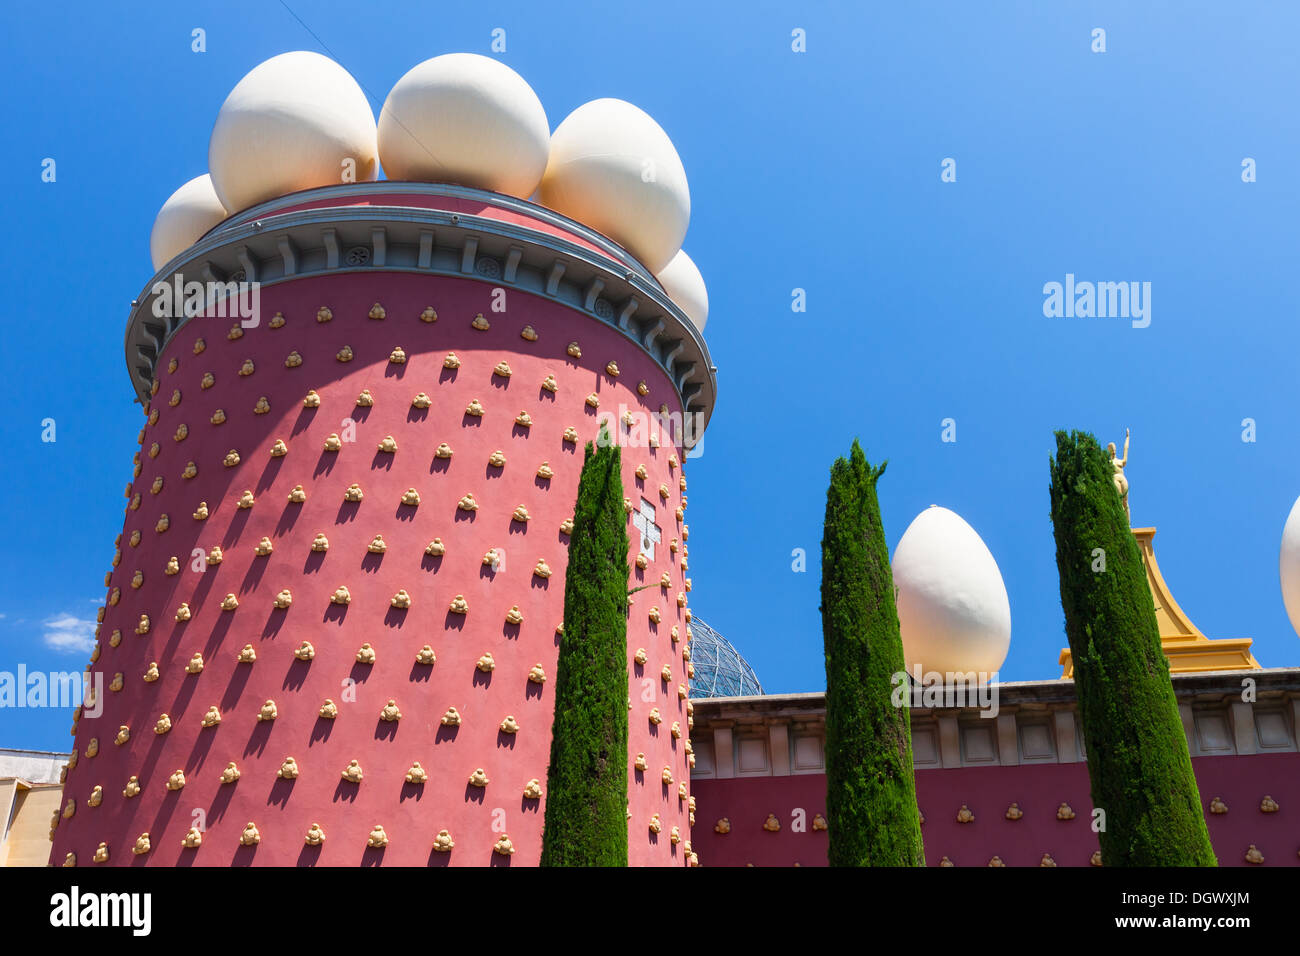 Details of Salvador Dali museum in Figueras, Spain Stock Photo